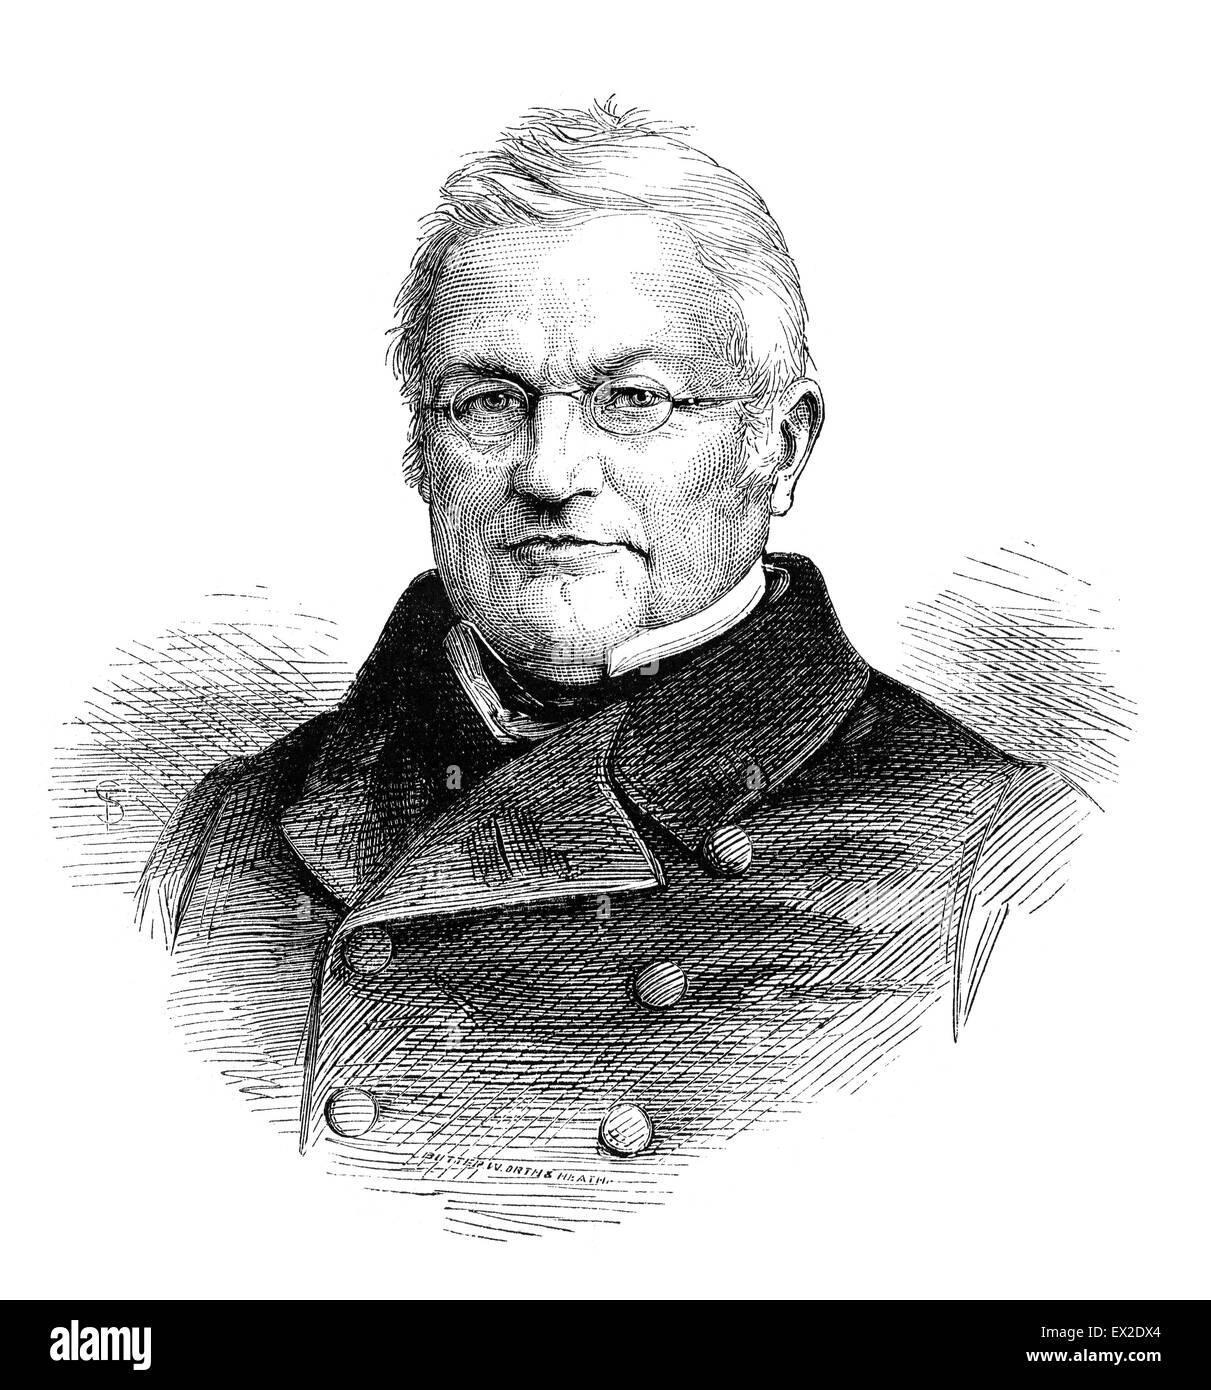 Marie Joseph Louis Adolphe Thiers (1797-1877) was a French politician and historian. Engraving from magazine Forr och Nu, 1876. Stock Photo